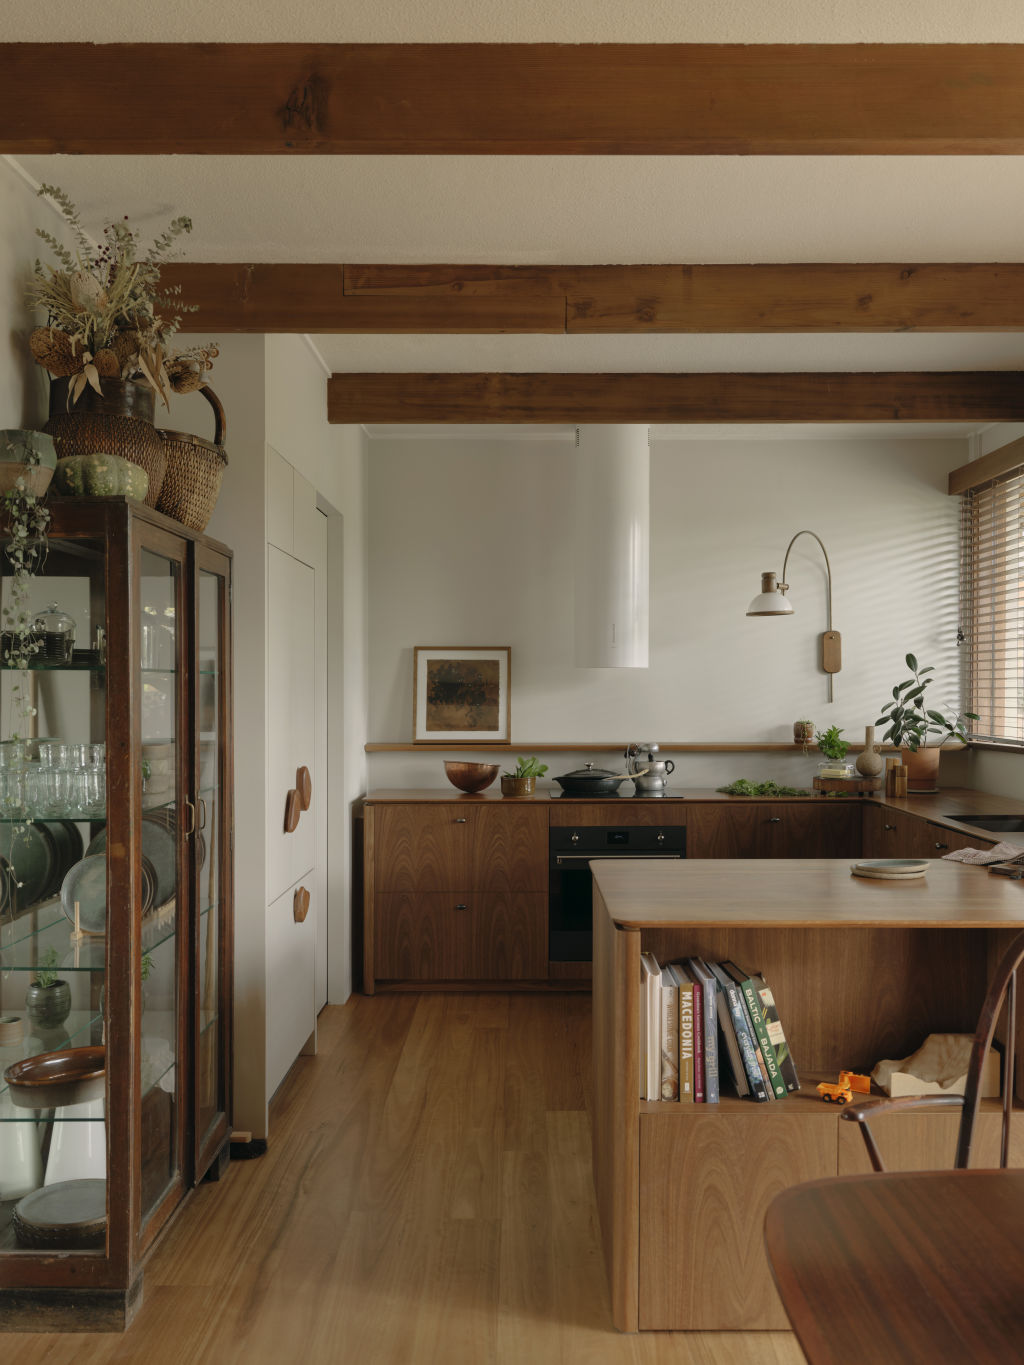 They set out to improve the home's efficiency and elevate its design. Photo: Tom Ross & Pier Carthew